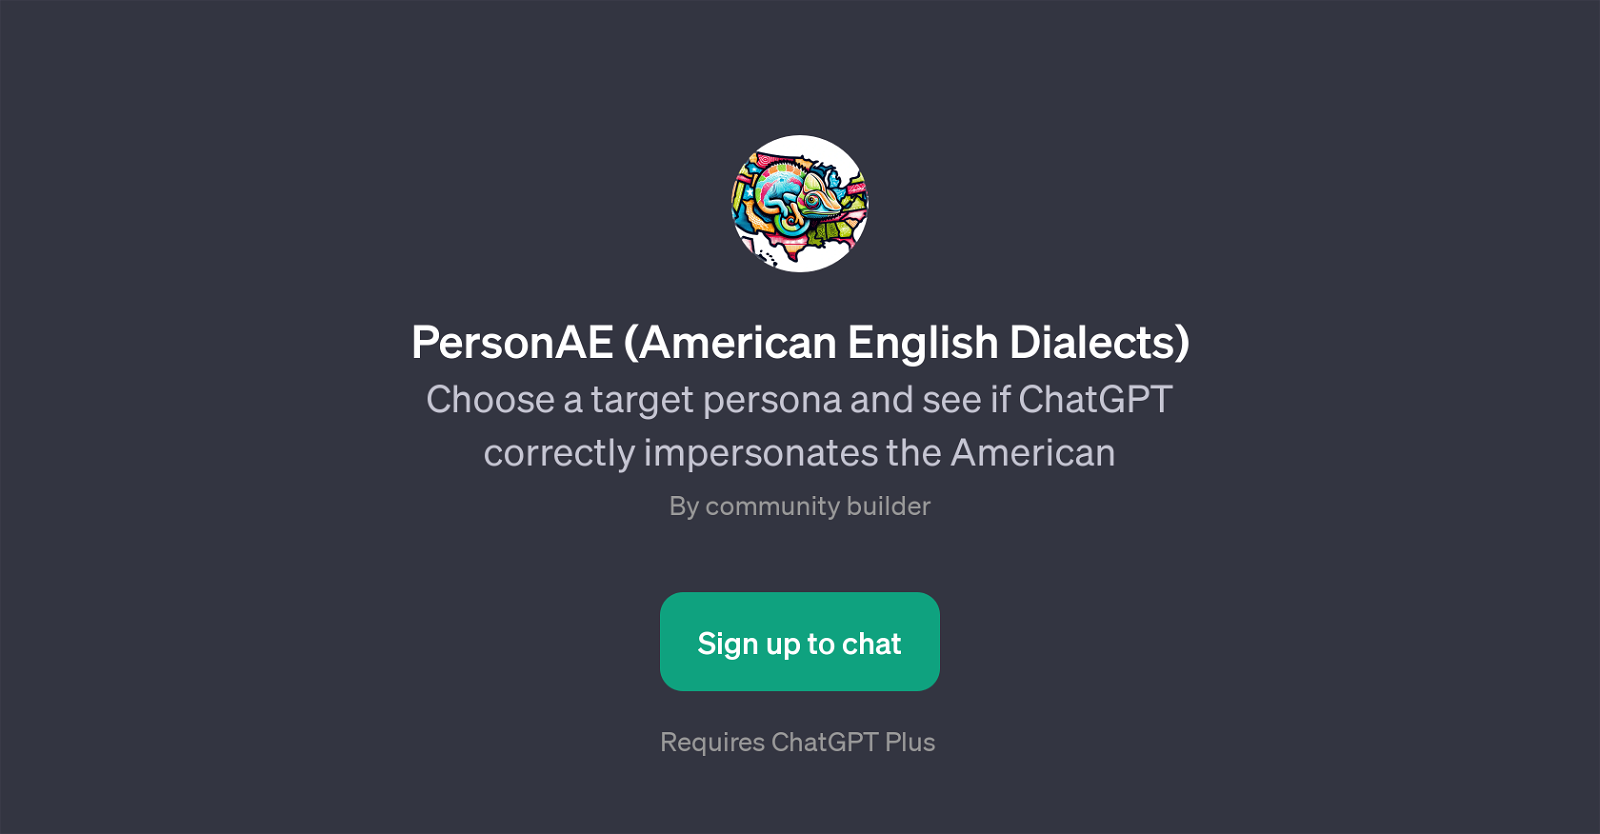 PersonAE (American English Dialects) website